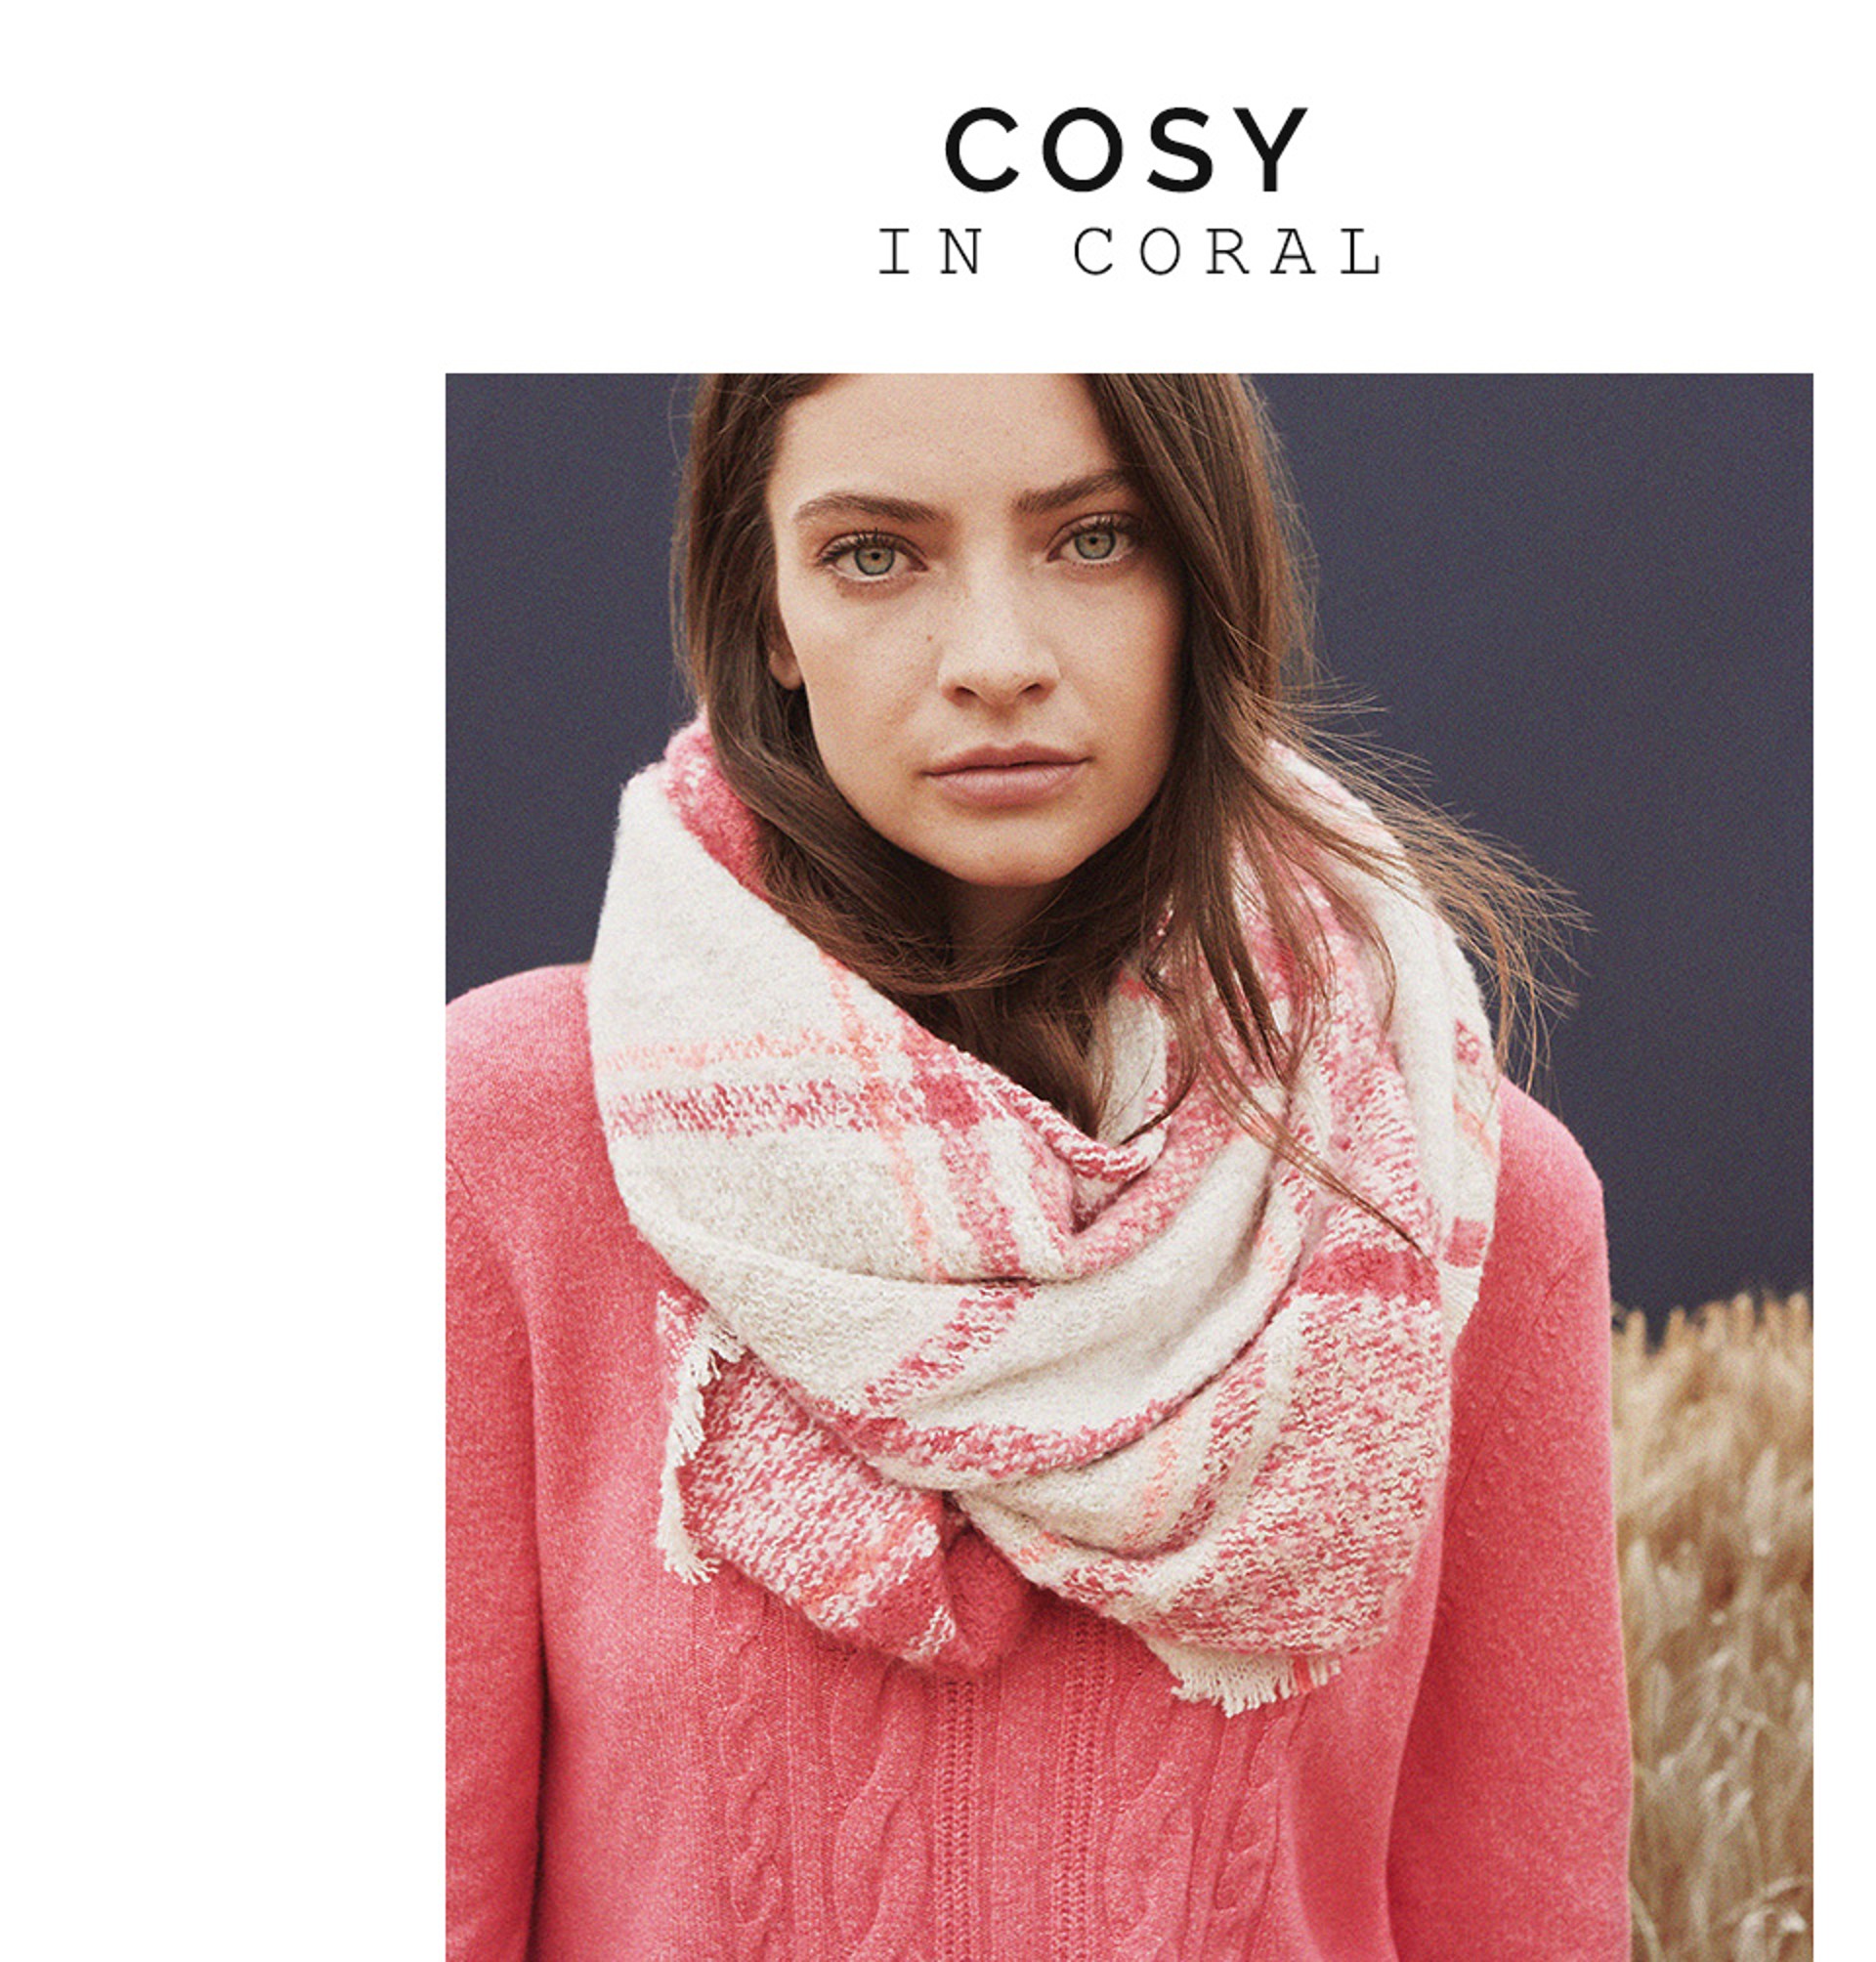 Cosy in Coral